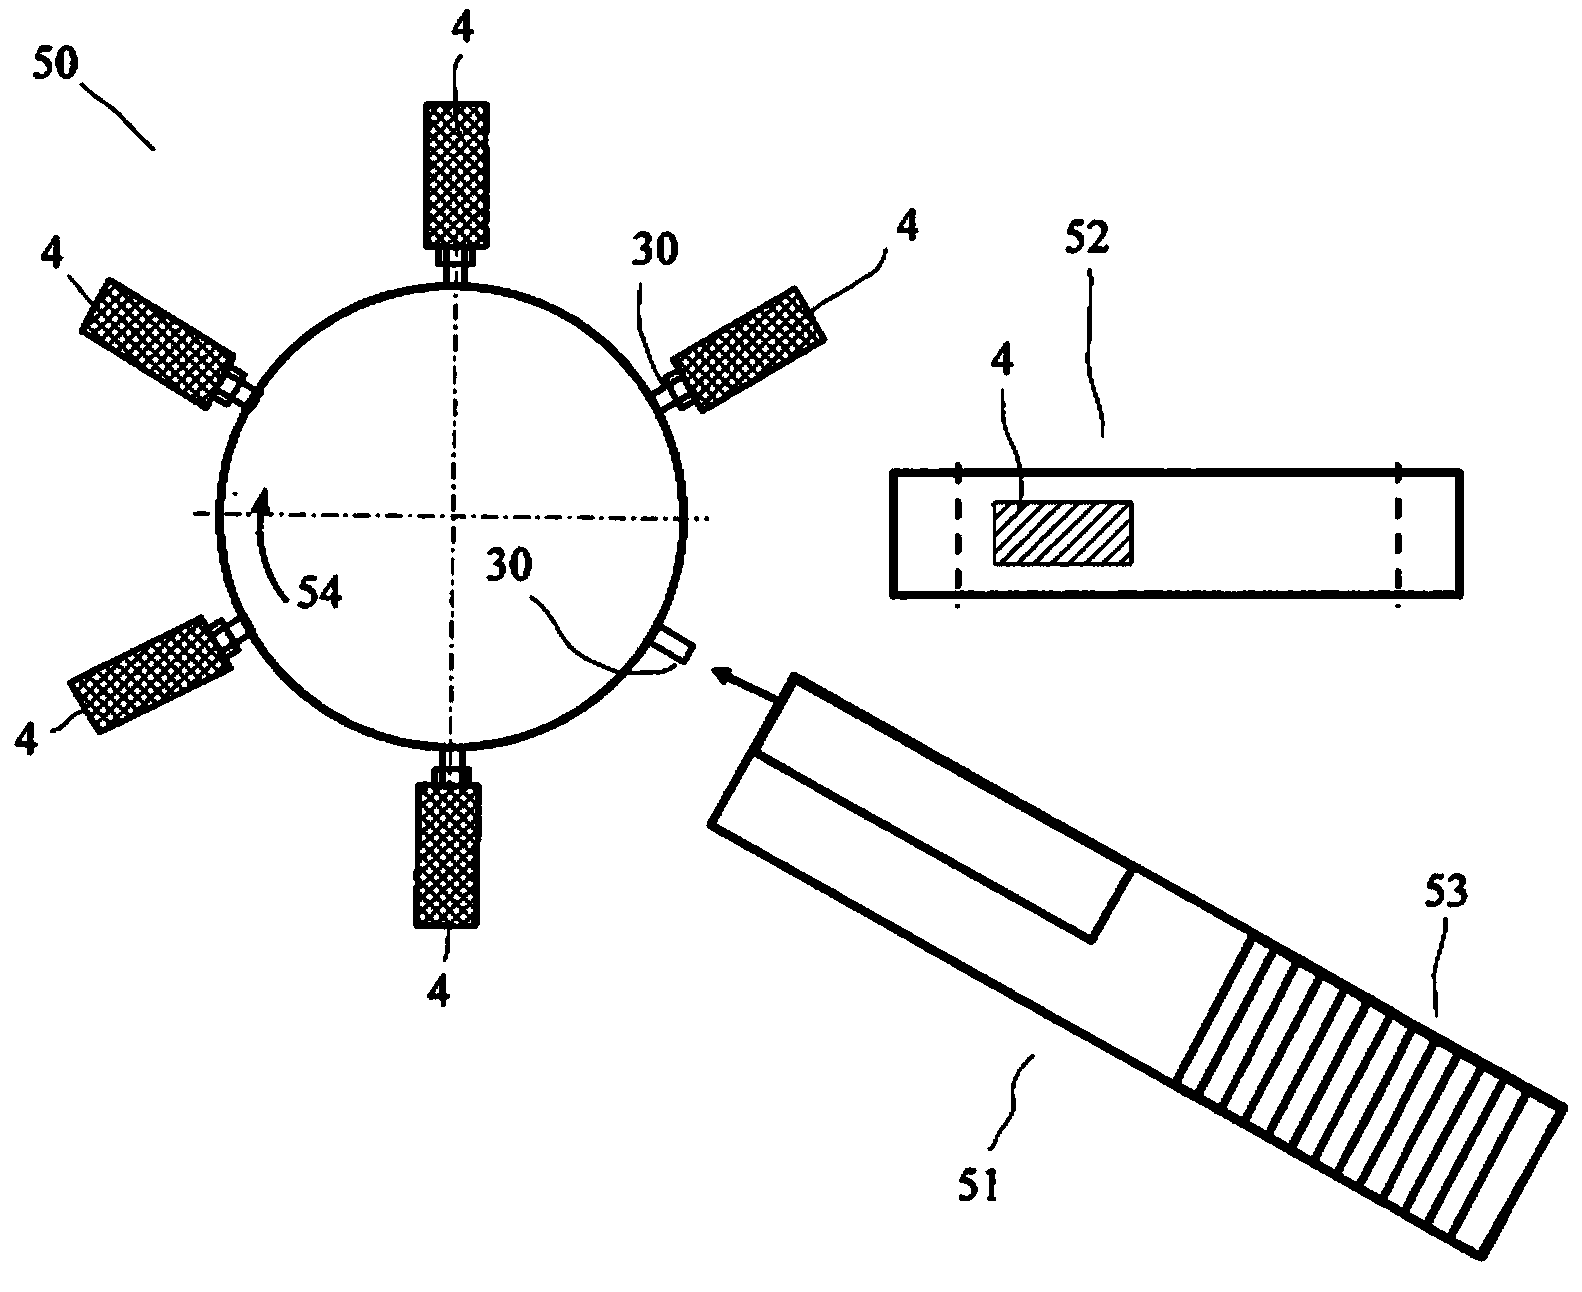 Filing device for packaging machine